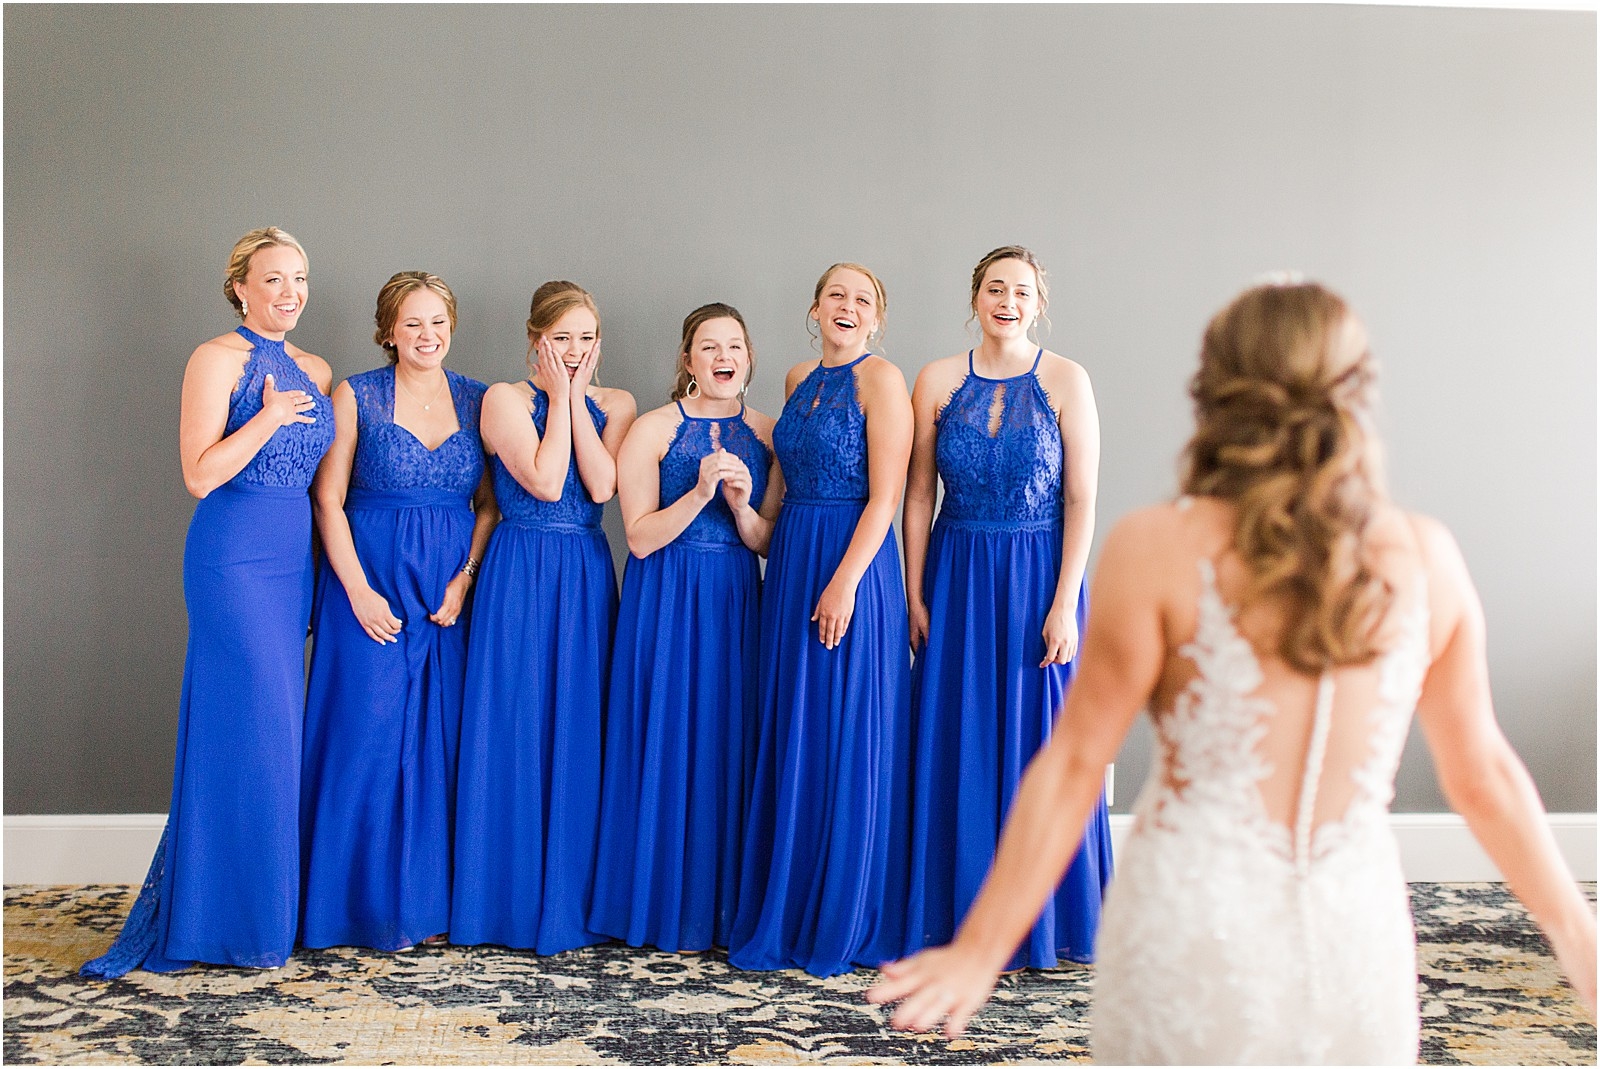 An Evansville County Club Wedding | Abby and Stratton 020.jpg